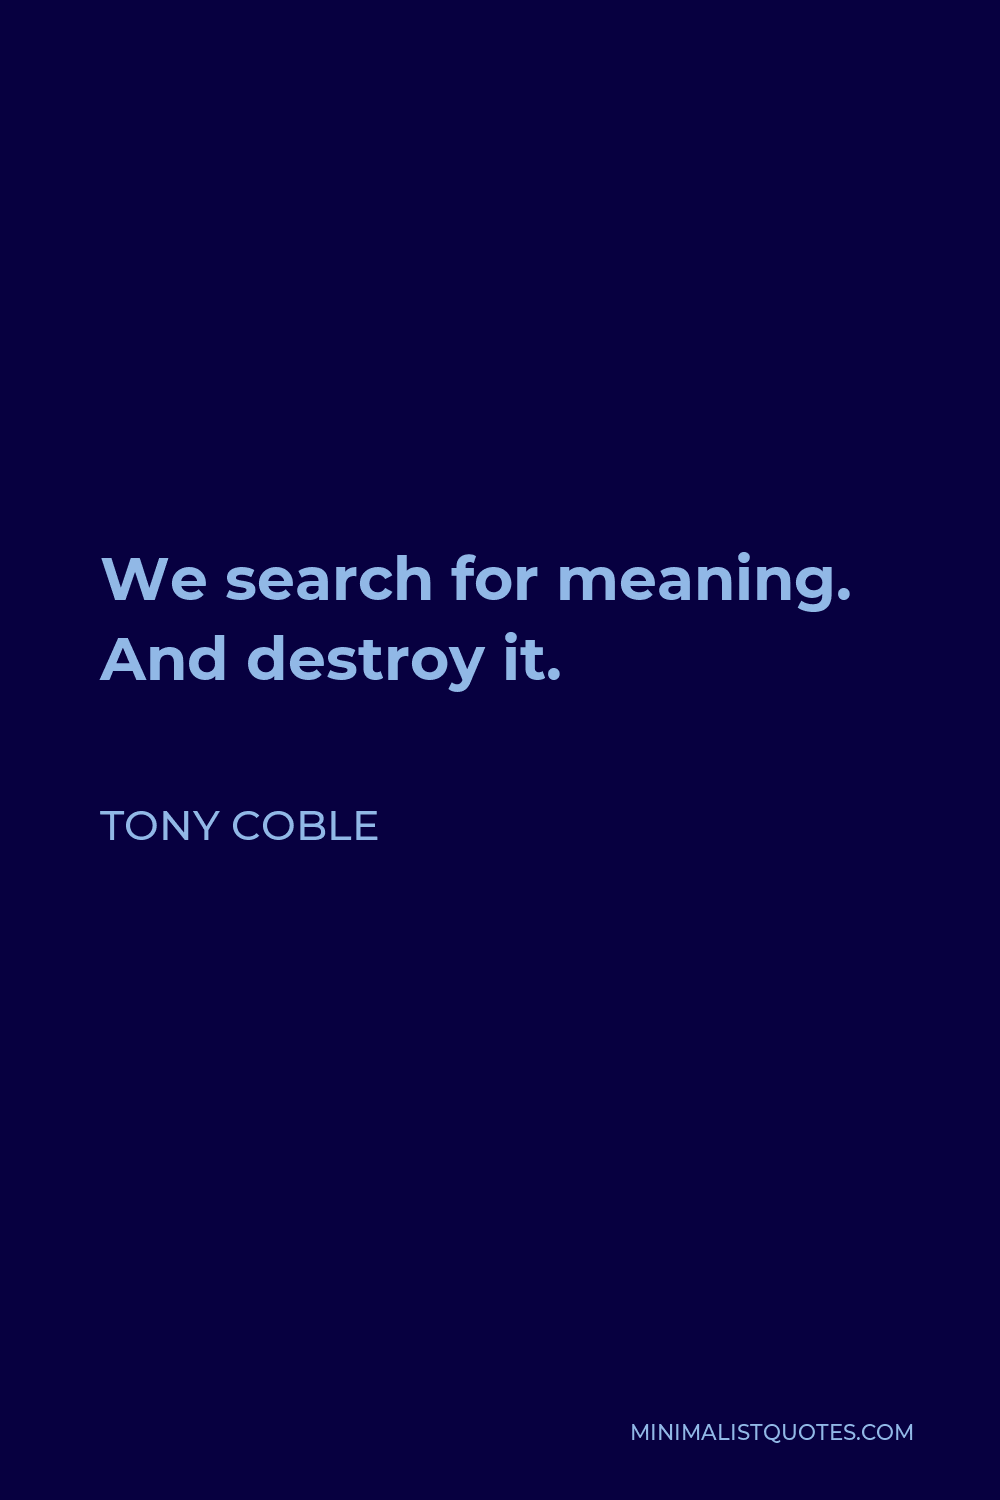 Tony Coble Quote - We search for meaning. And destroy it.